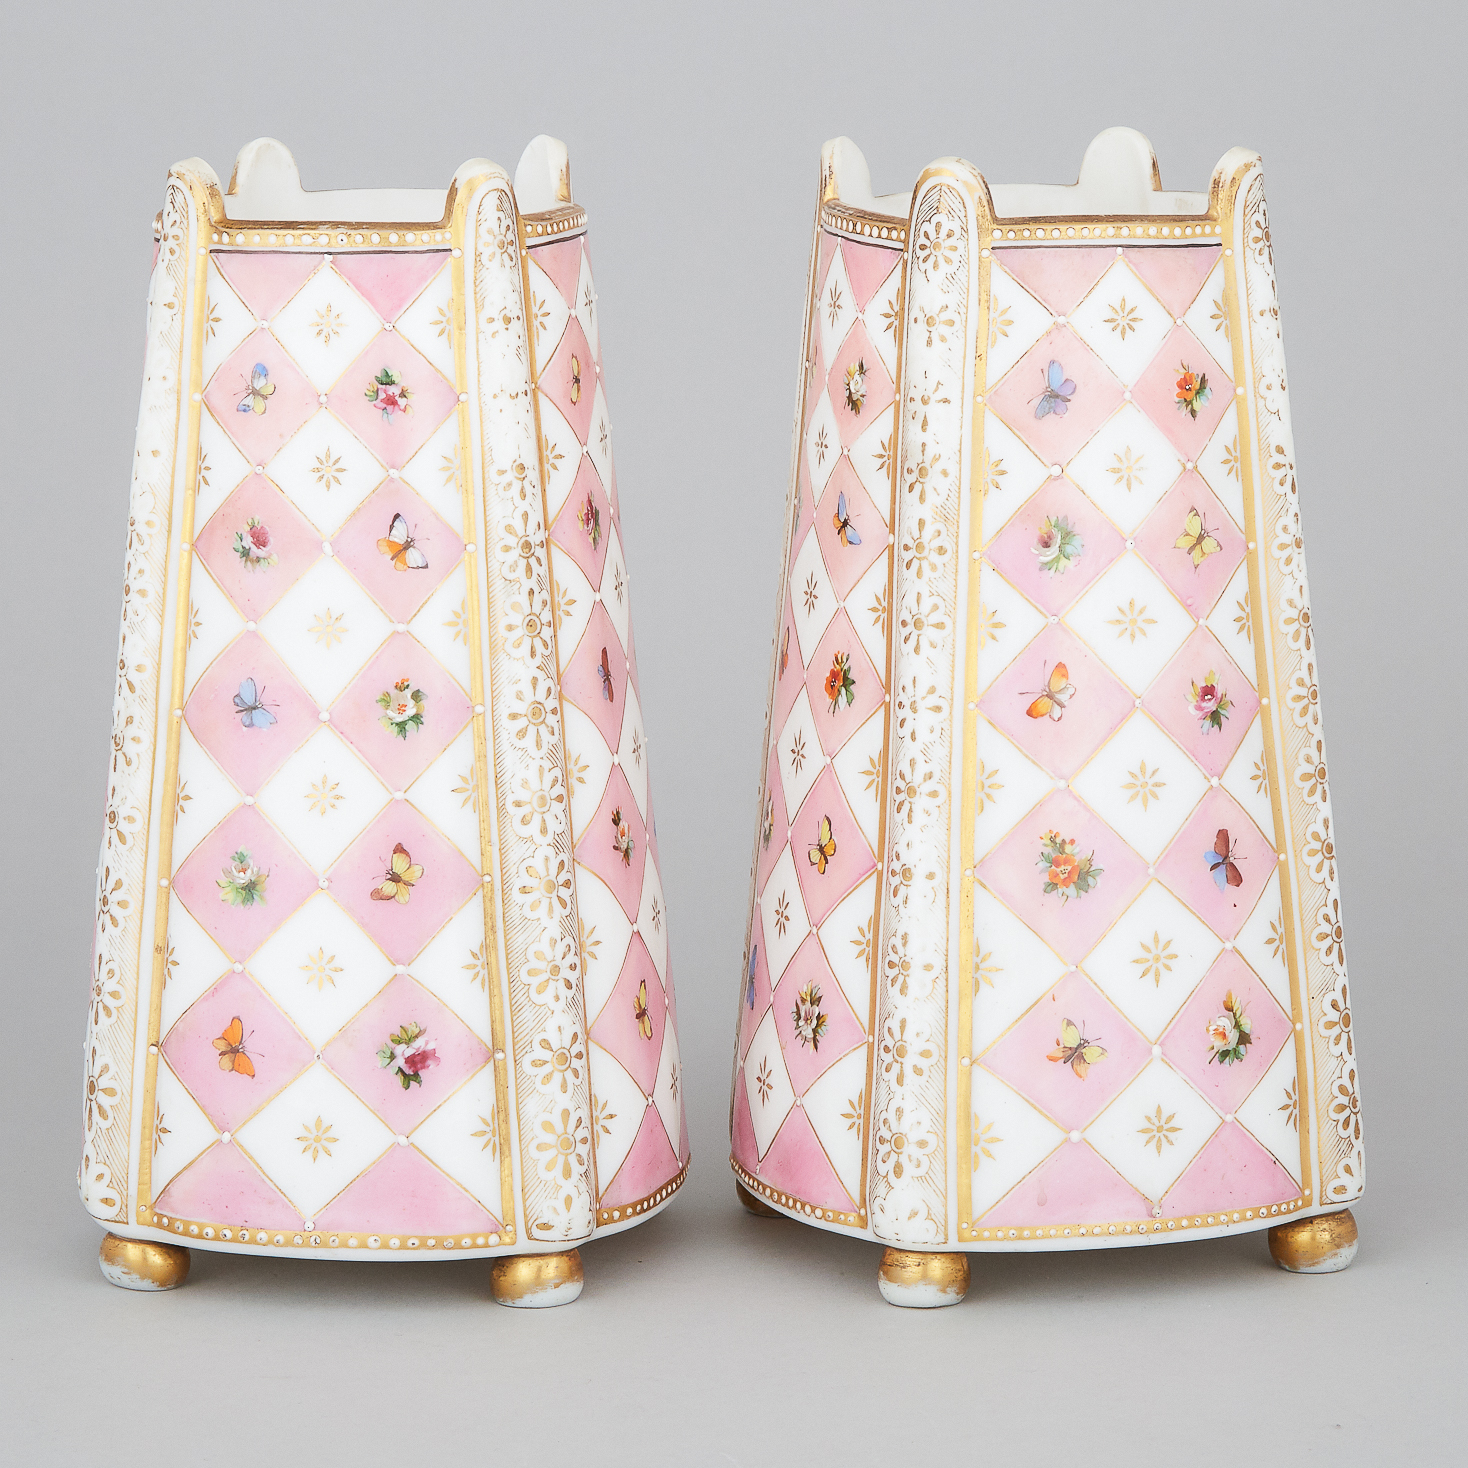 Pair of French Enameled and Gilt Opaline Glass Vases, late 19th century